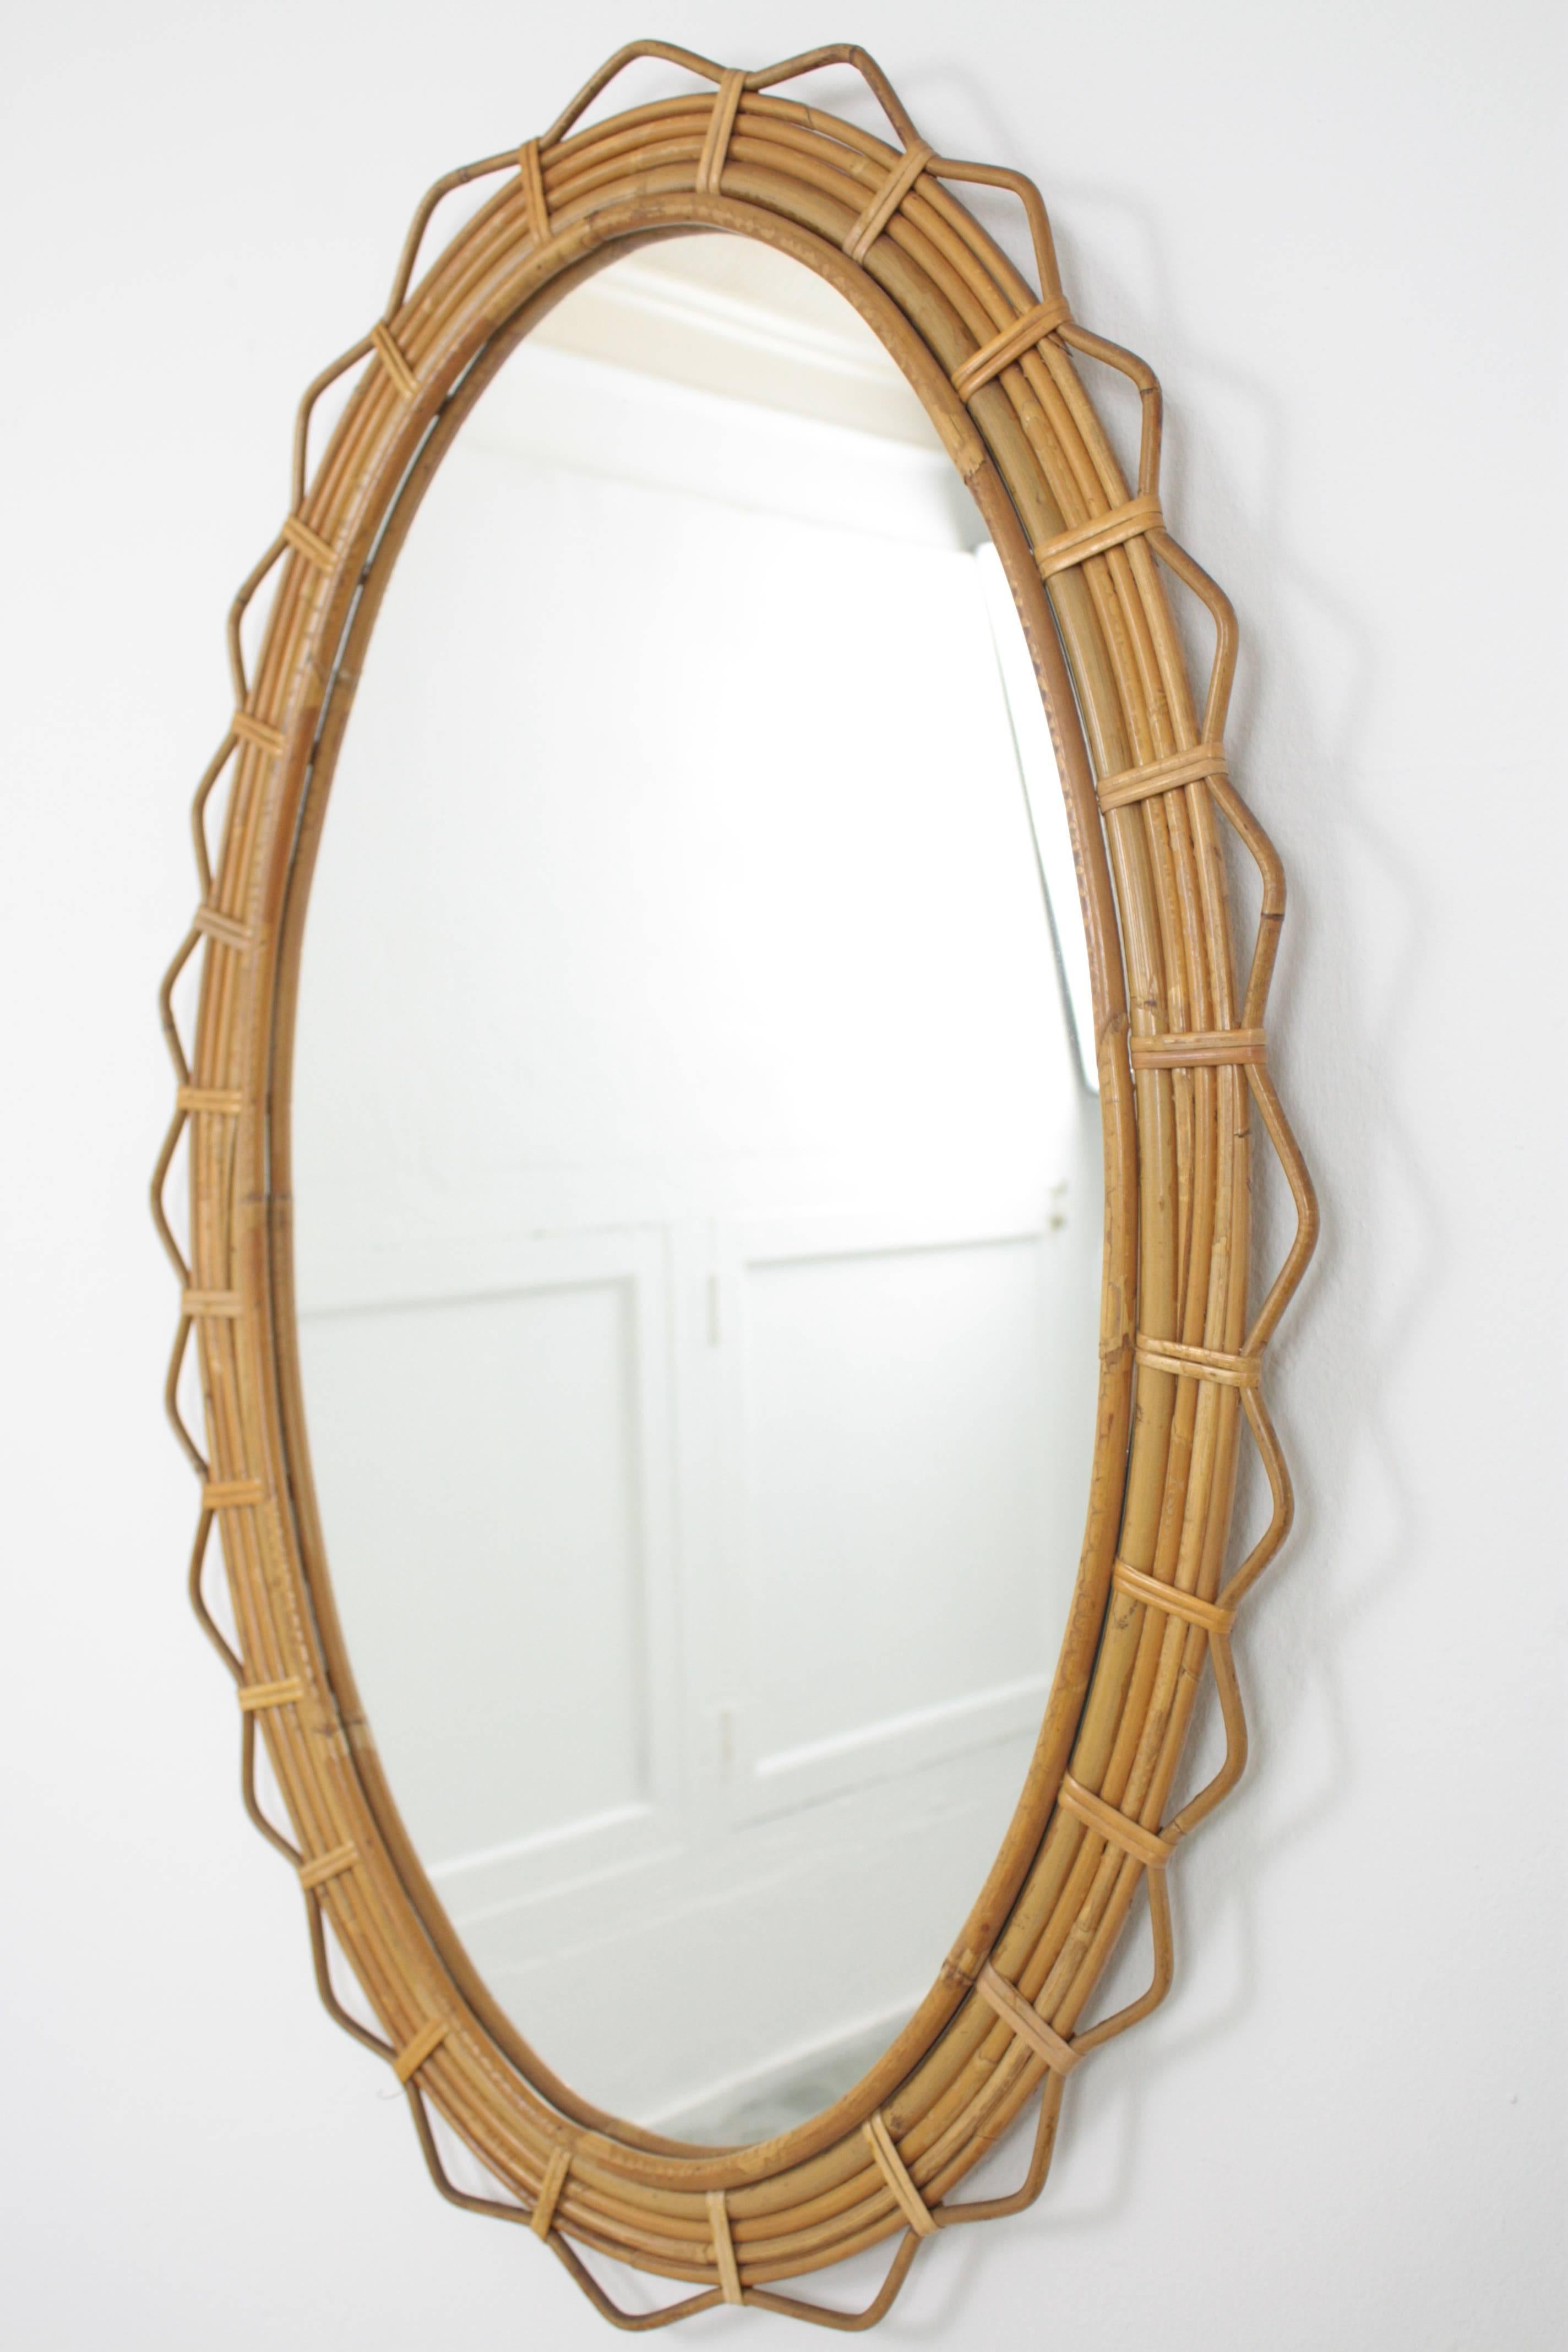 A spectacular handcrafted bamboo and rattan mirror with a beautiful geometric design frame. This piece has all the taste of the Mediterranean French Riviera,
France, 1950s.

Lovely to place it alone or creating a wall decoration with other